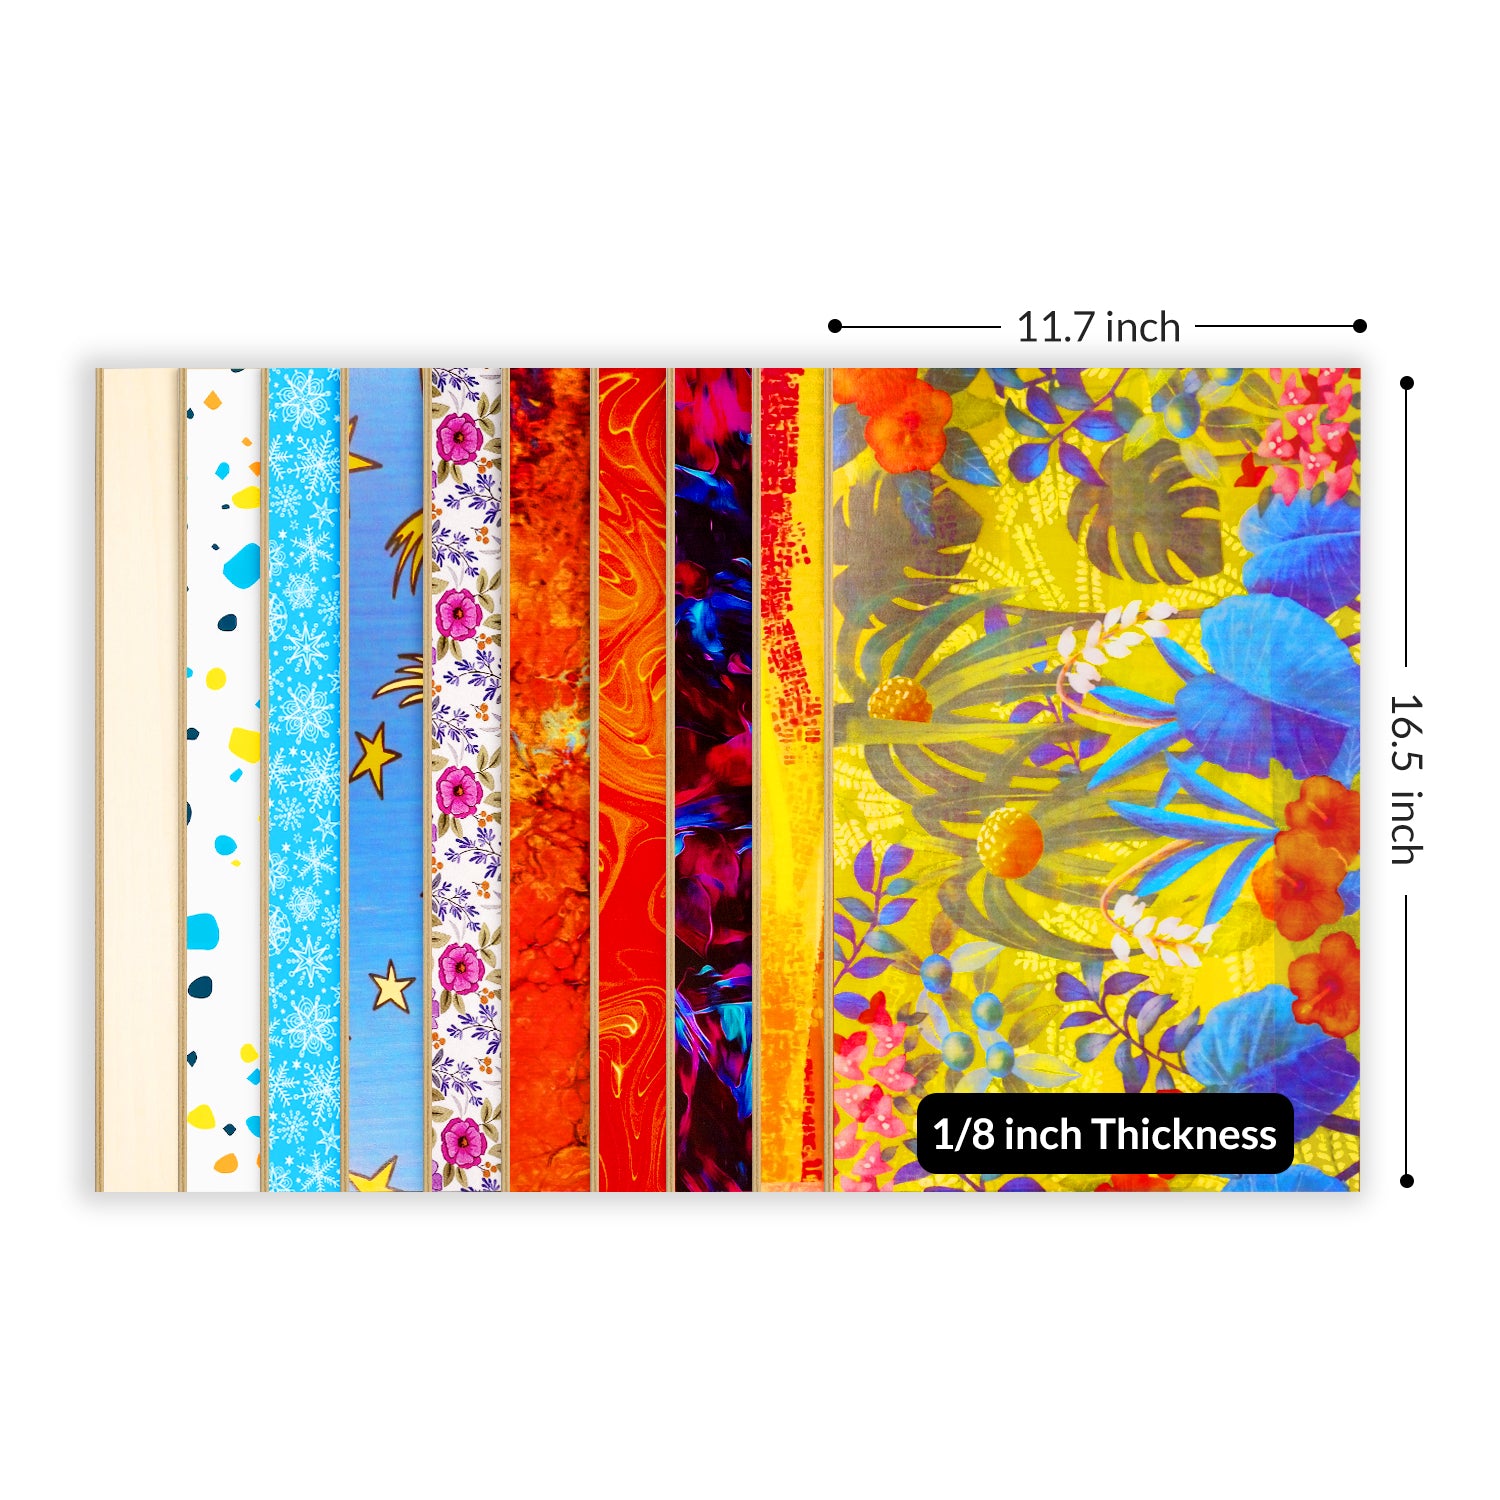 Double-sided UV Ink Printed Patterned Color Plywood